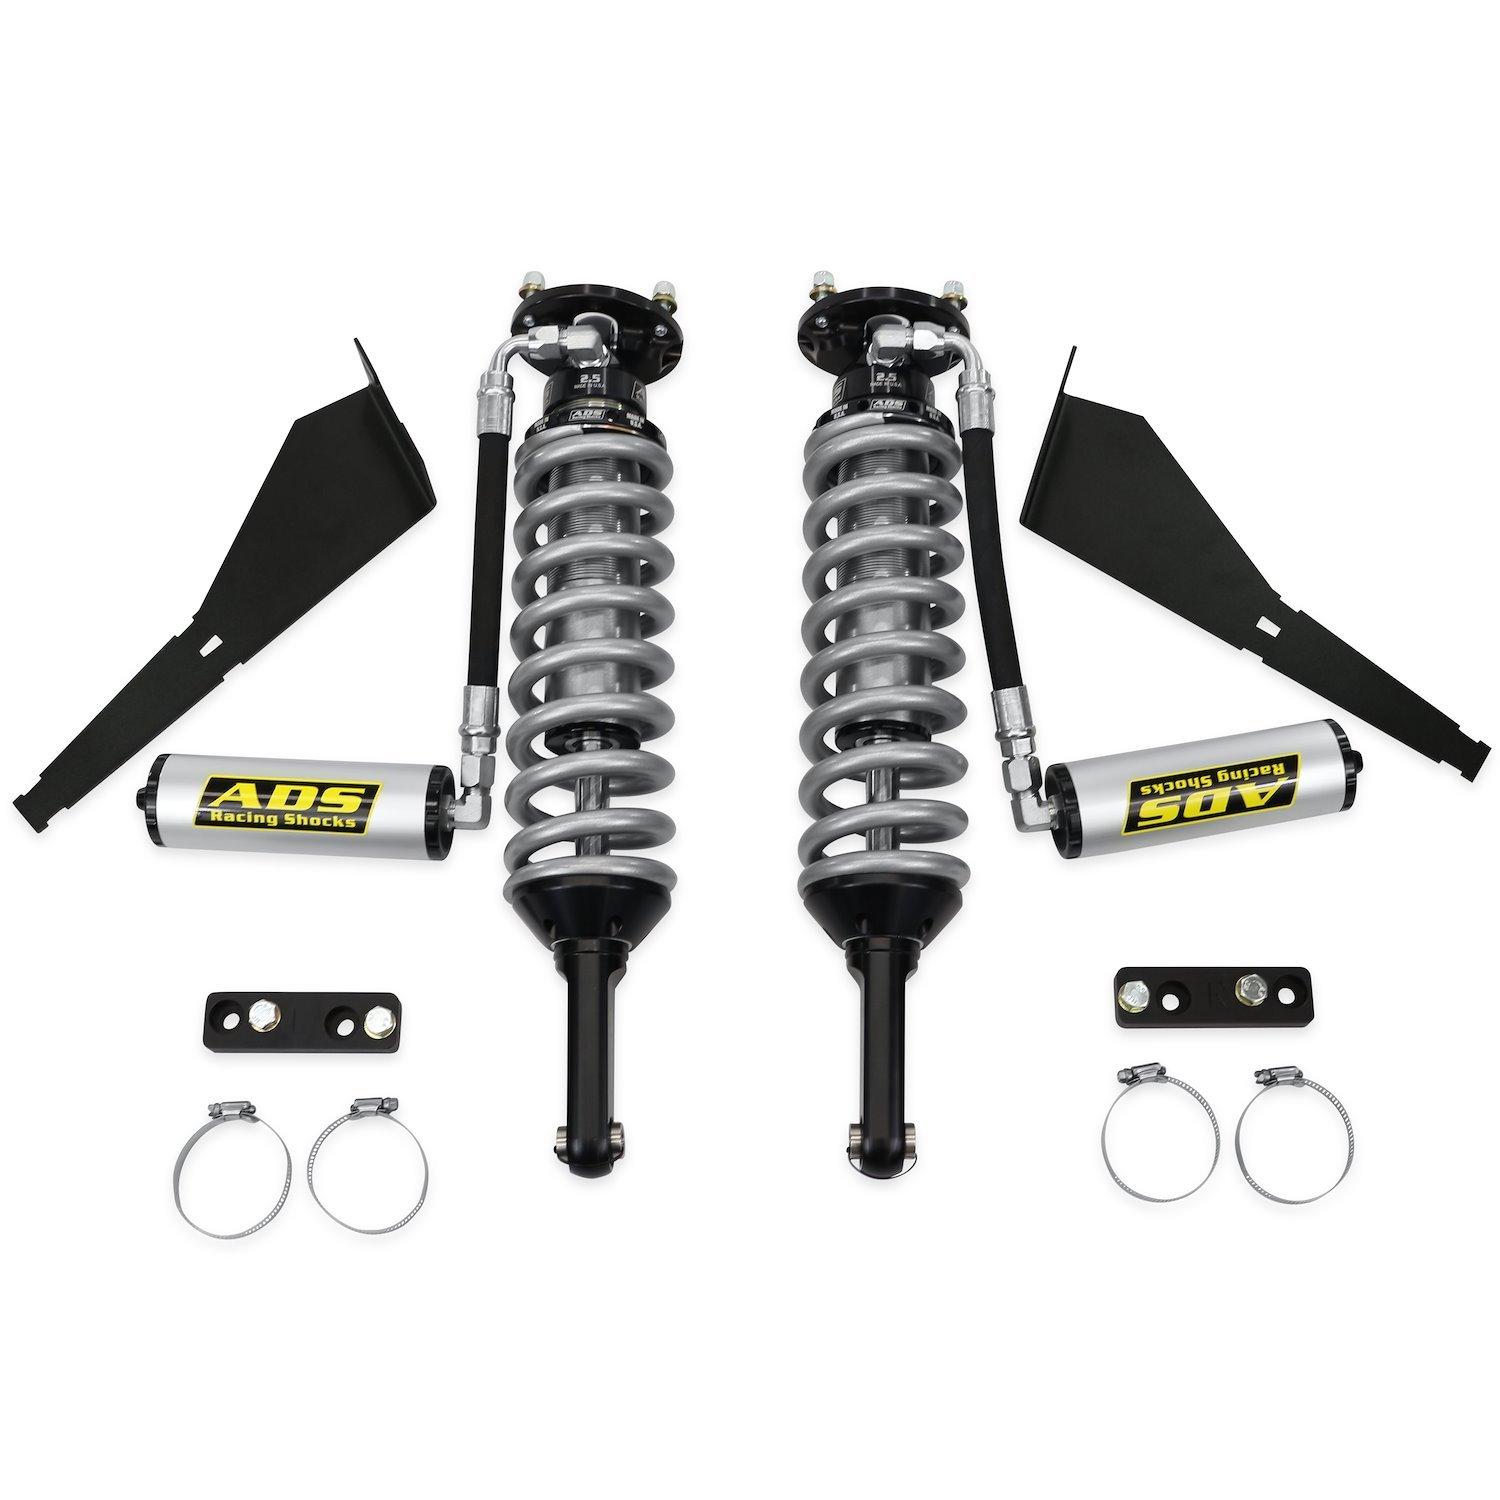 250-ZR20F-A65 Racing Bolt-On Shocks, Fits Select Chevy Colorado/GMC Canyon ZR2, 2.5 in., w/ Remote Reservoir, 0-2 in. Lift